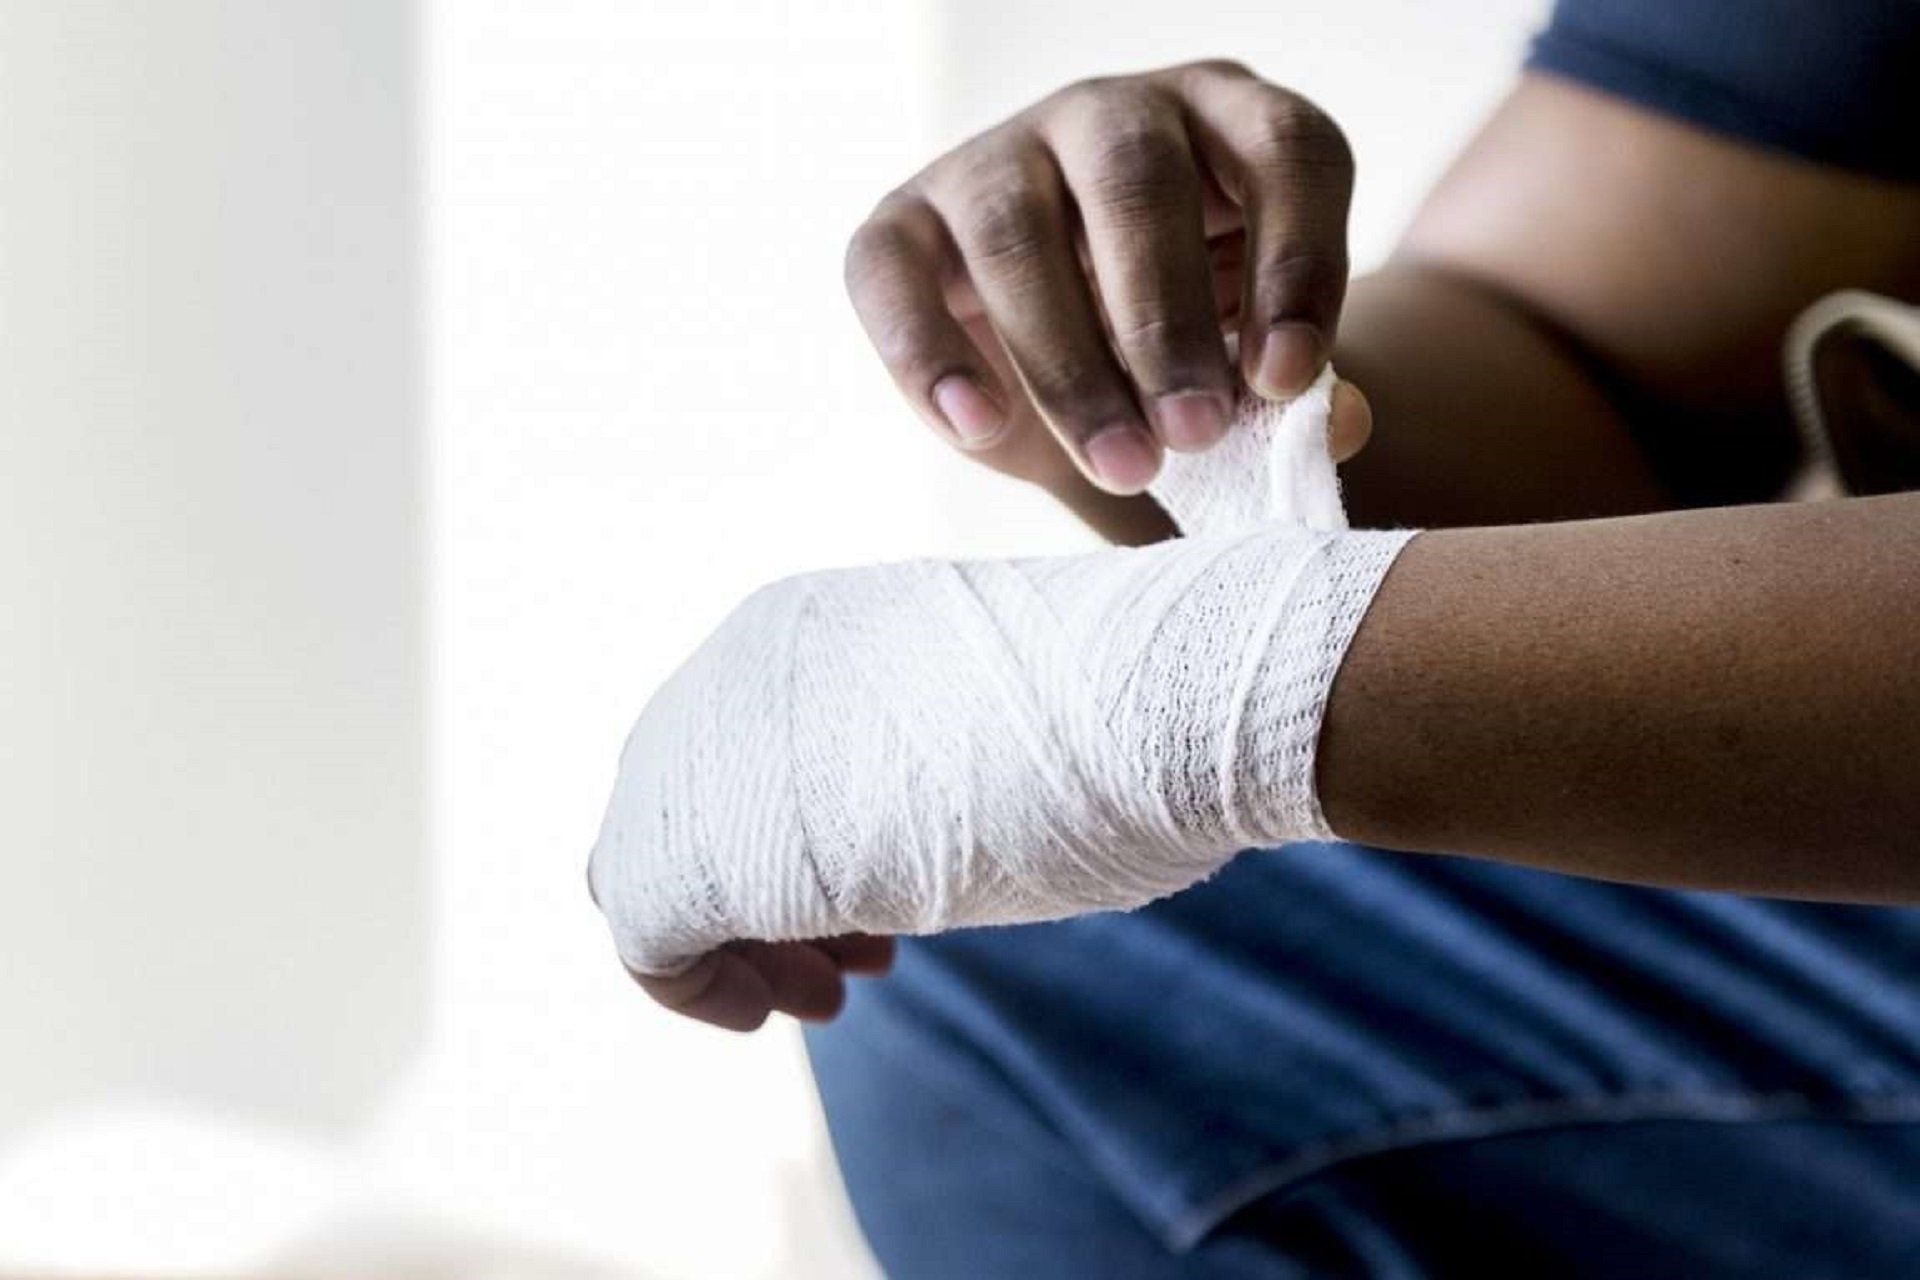 workers’ compensation works in Florida